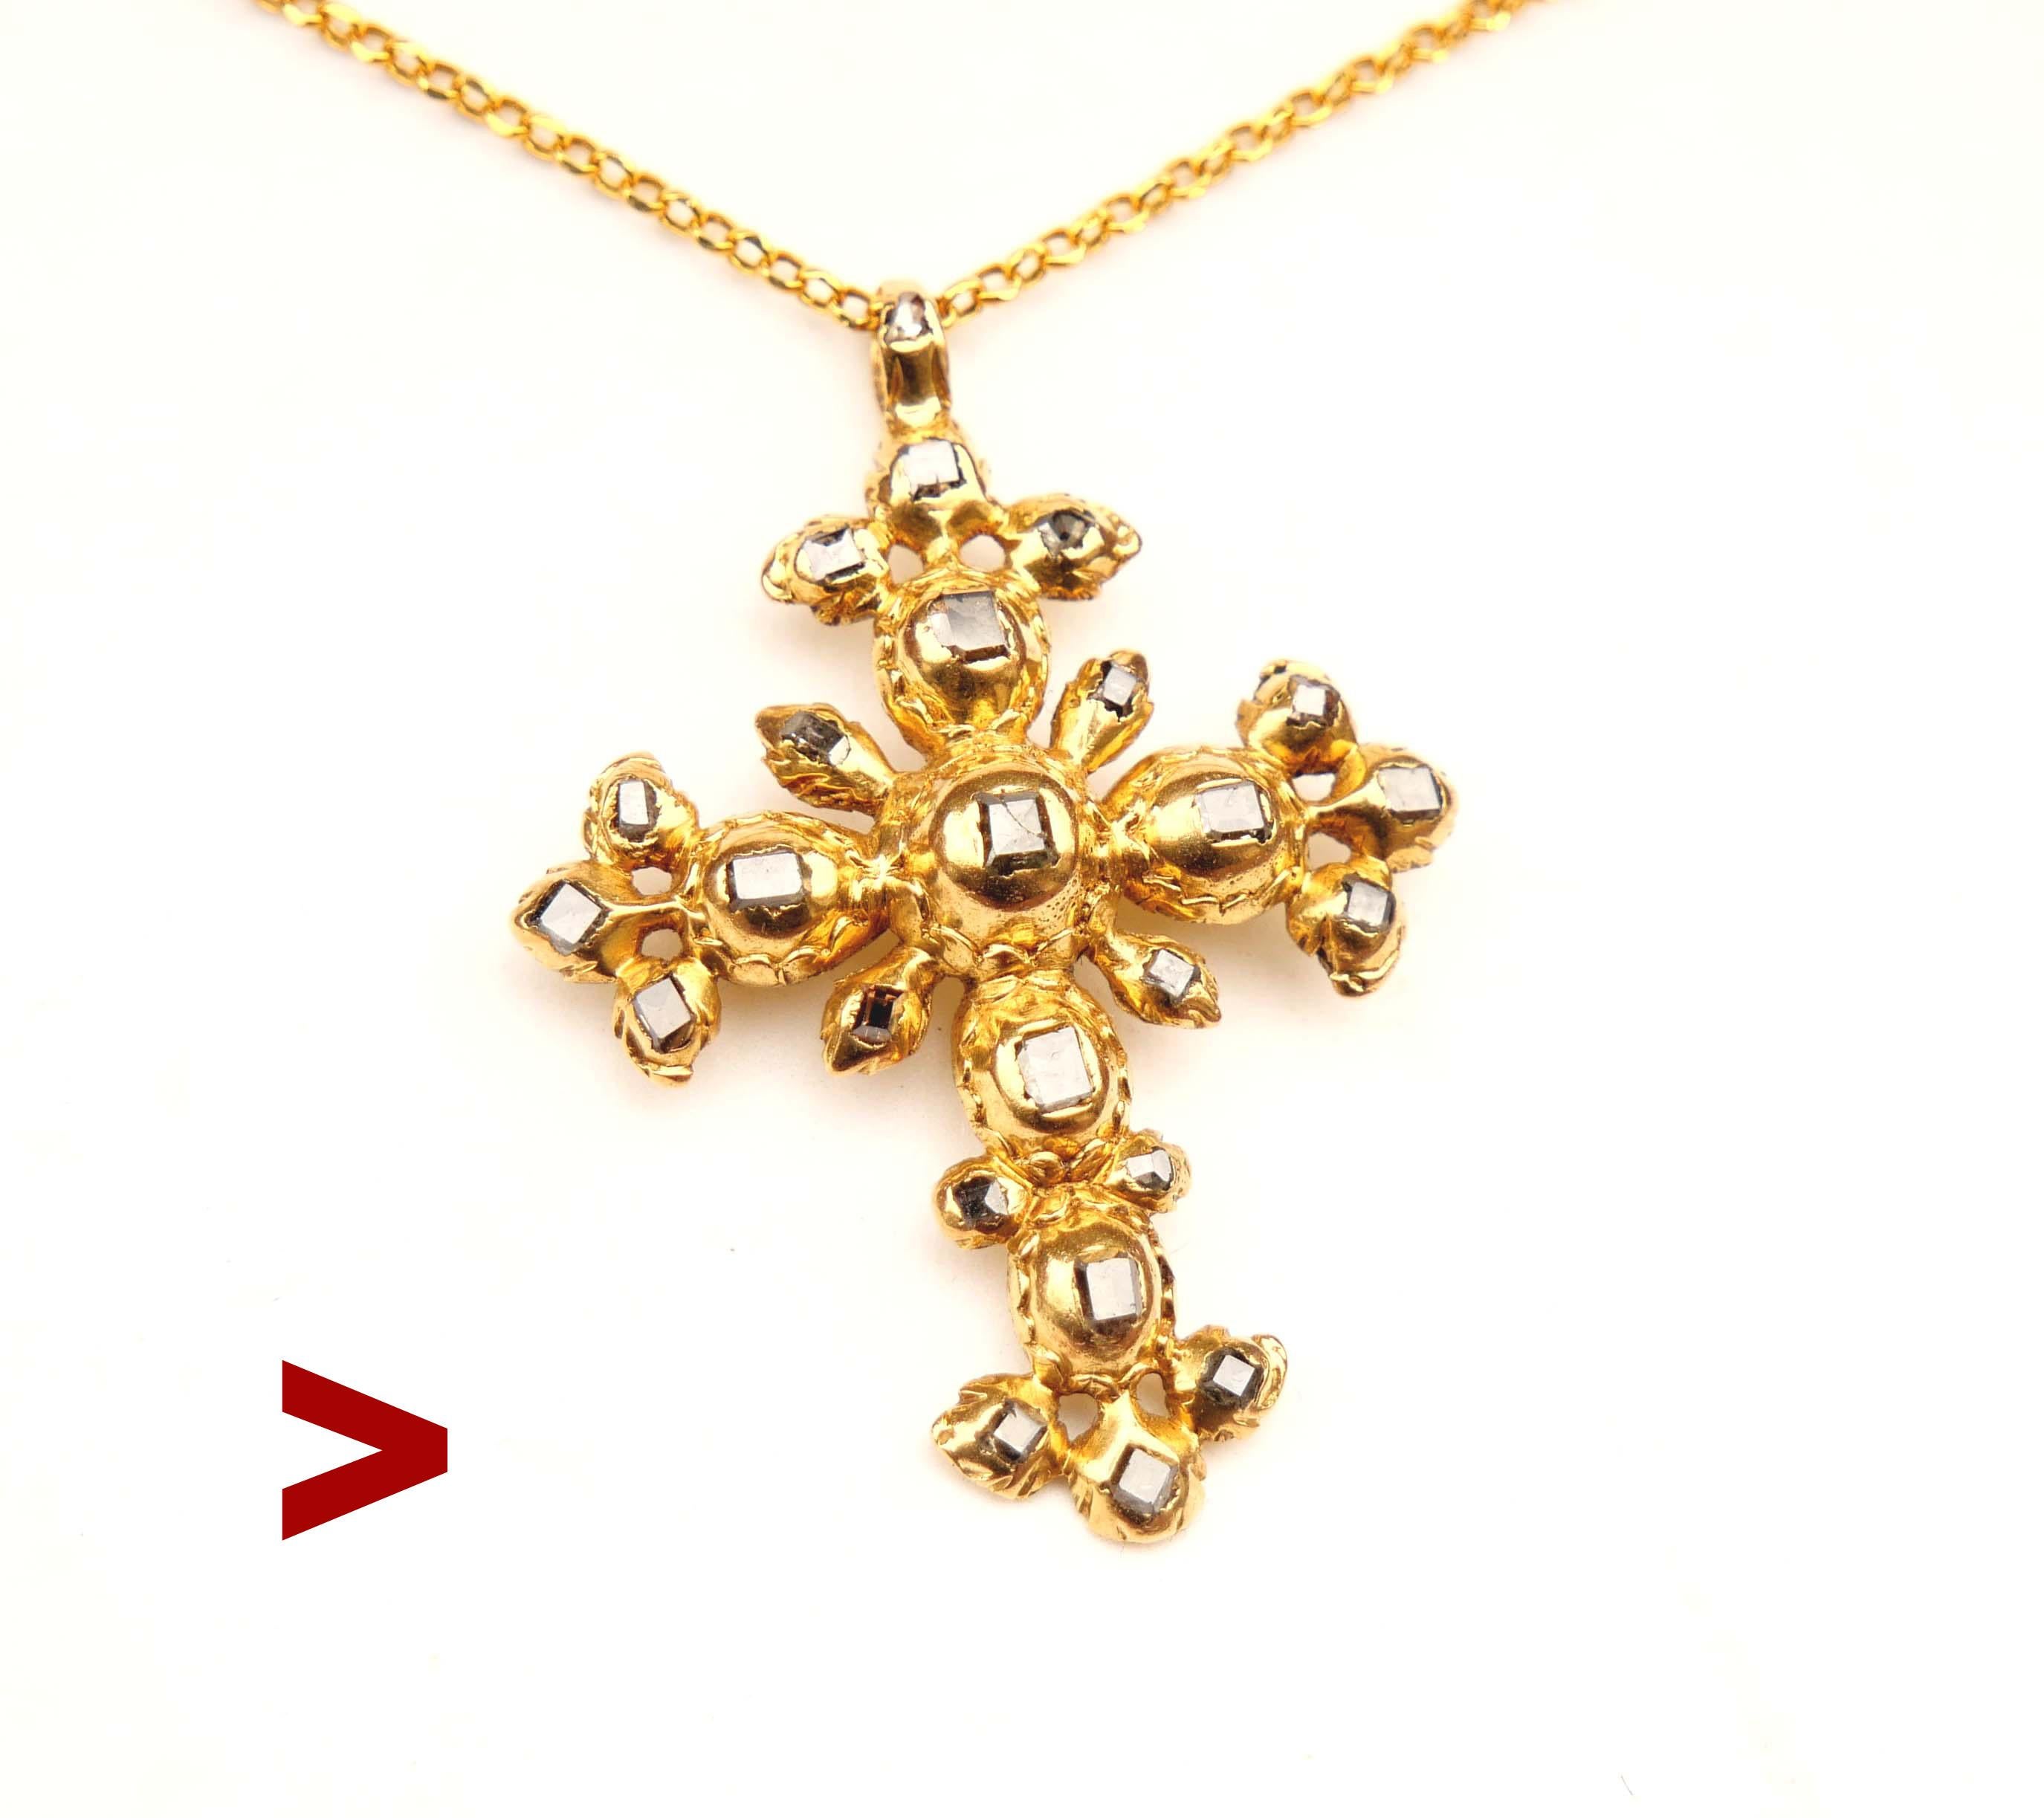 Very rare ca. early 17th century likely Italian or Spanish 19K Yellow Gold Cross Pendant with 24 Diamonds, all of table cut about 2 ctw. Hand - engraved decorations on the back side. Back side is a bit concave for best fit on the chest.

Metal